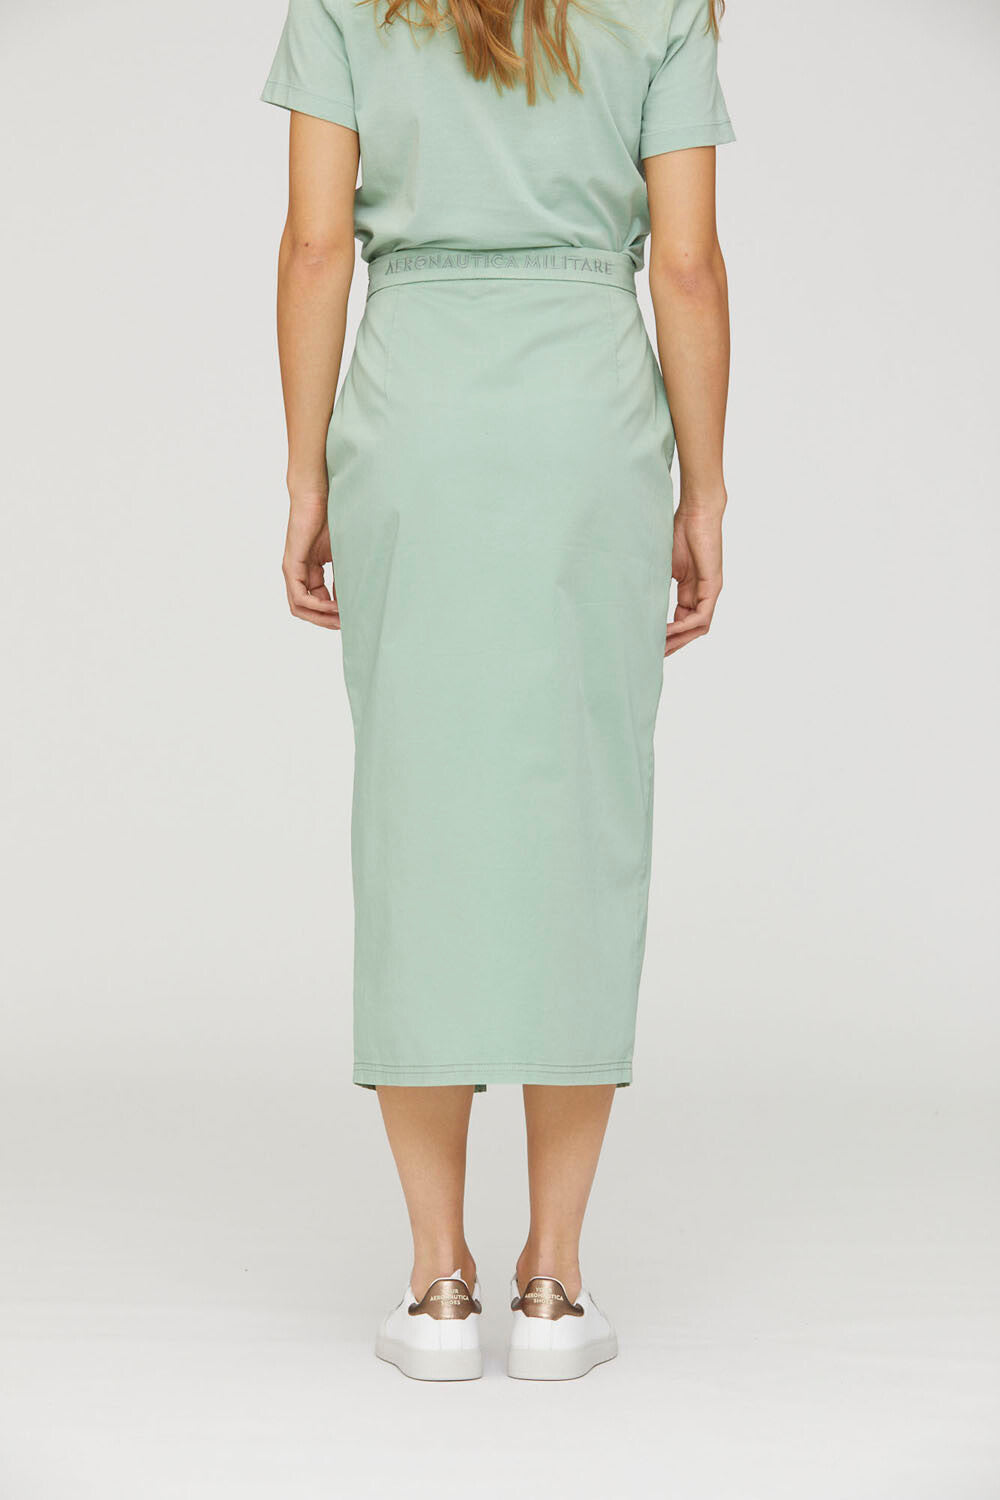 Midi skirt with pockets and slit